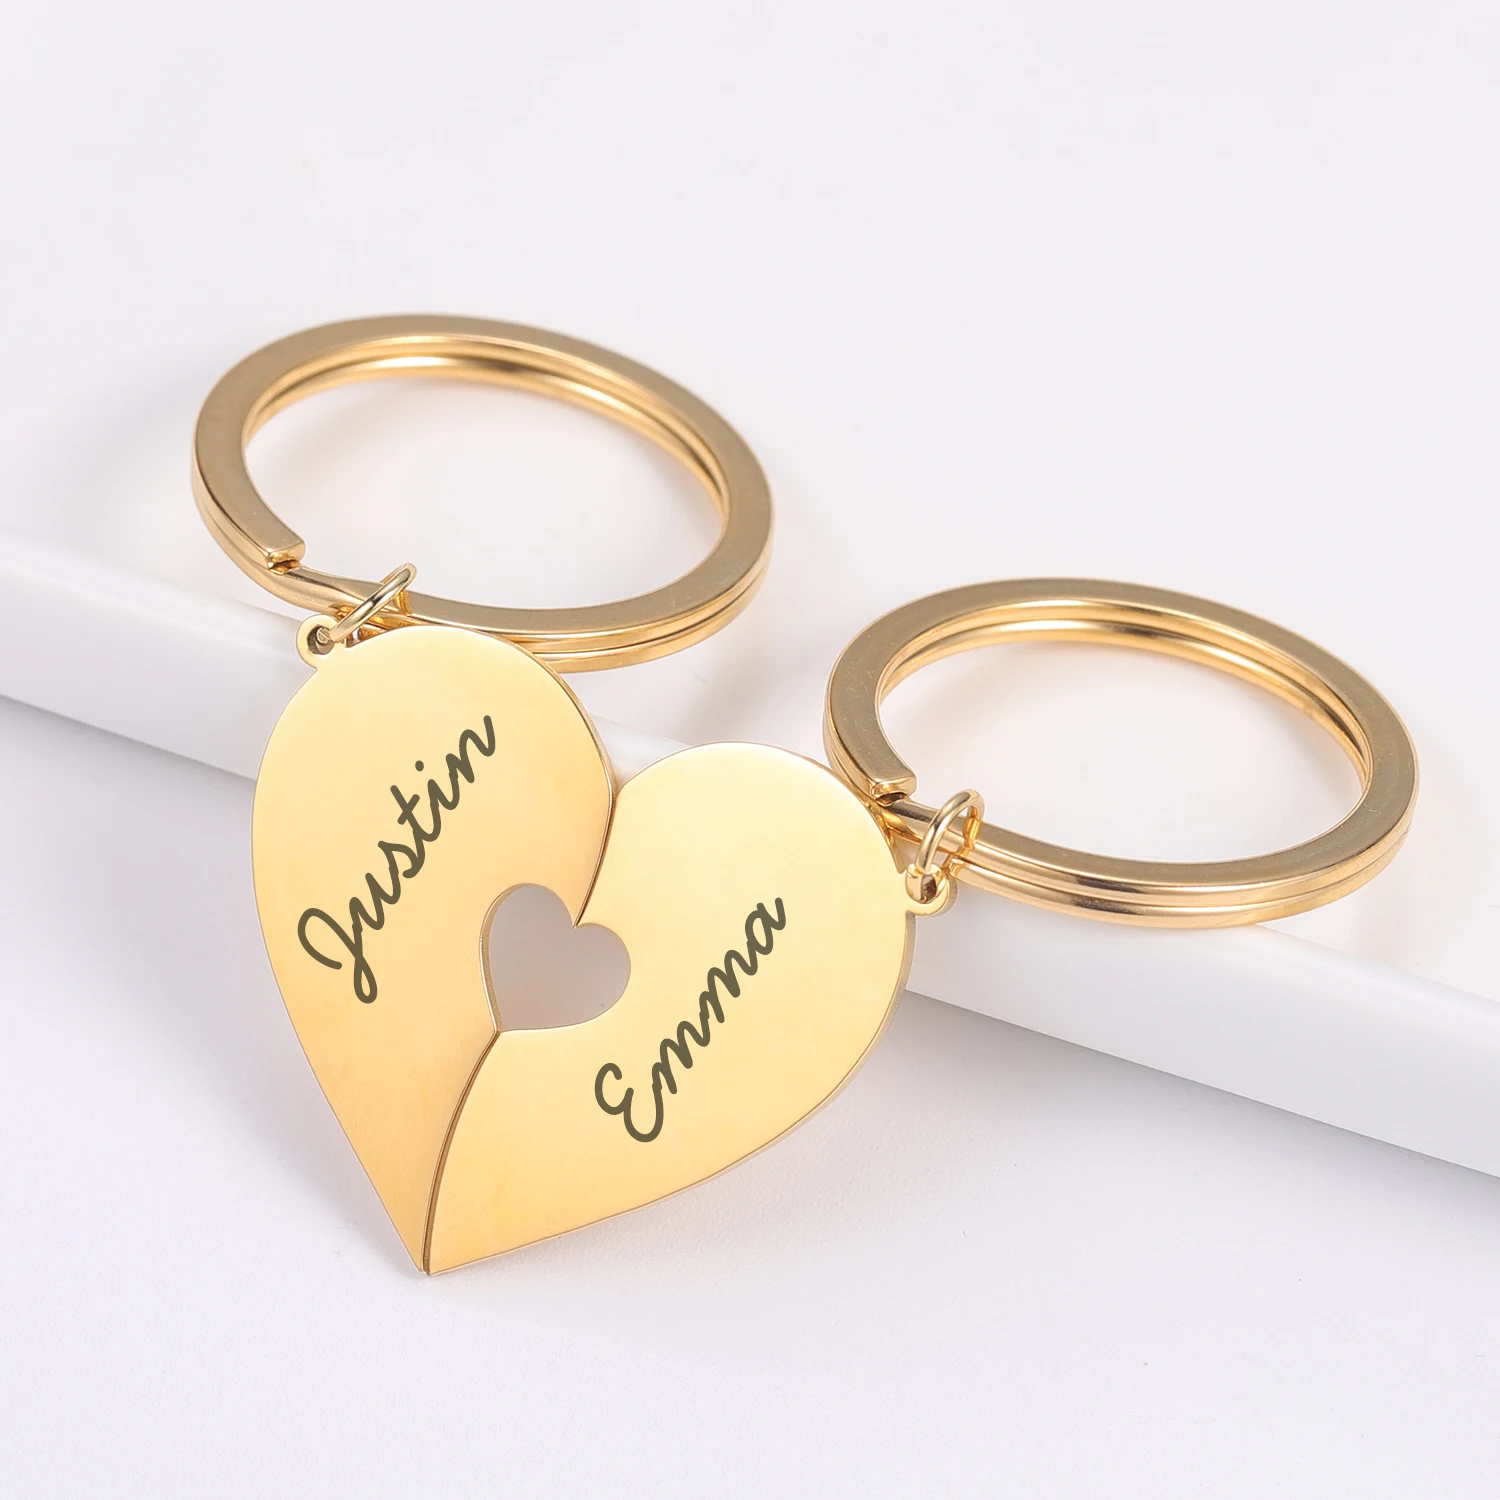 2Pcs Personalized Couples Keychain Valentine Anniversary Gift Boyfriend Girlfriend Heart KeyChain Man Women Key Chain Love Gifts personalized name bookmark custom heart page corner bookmark leather book mark for readers anniversary gift wedding gift for her